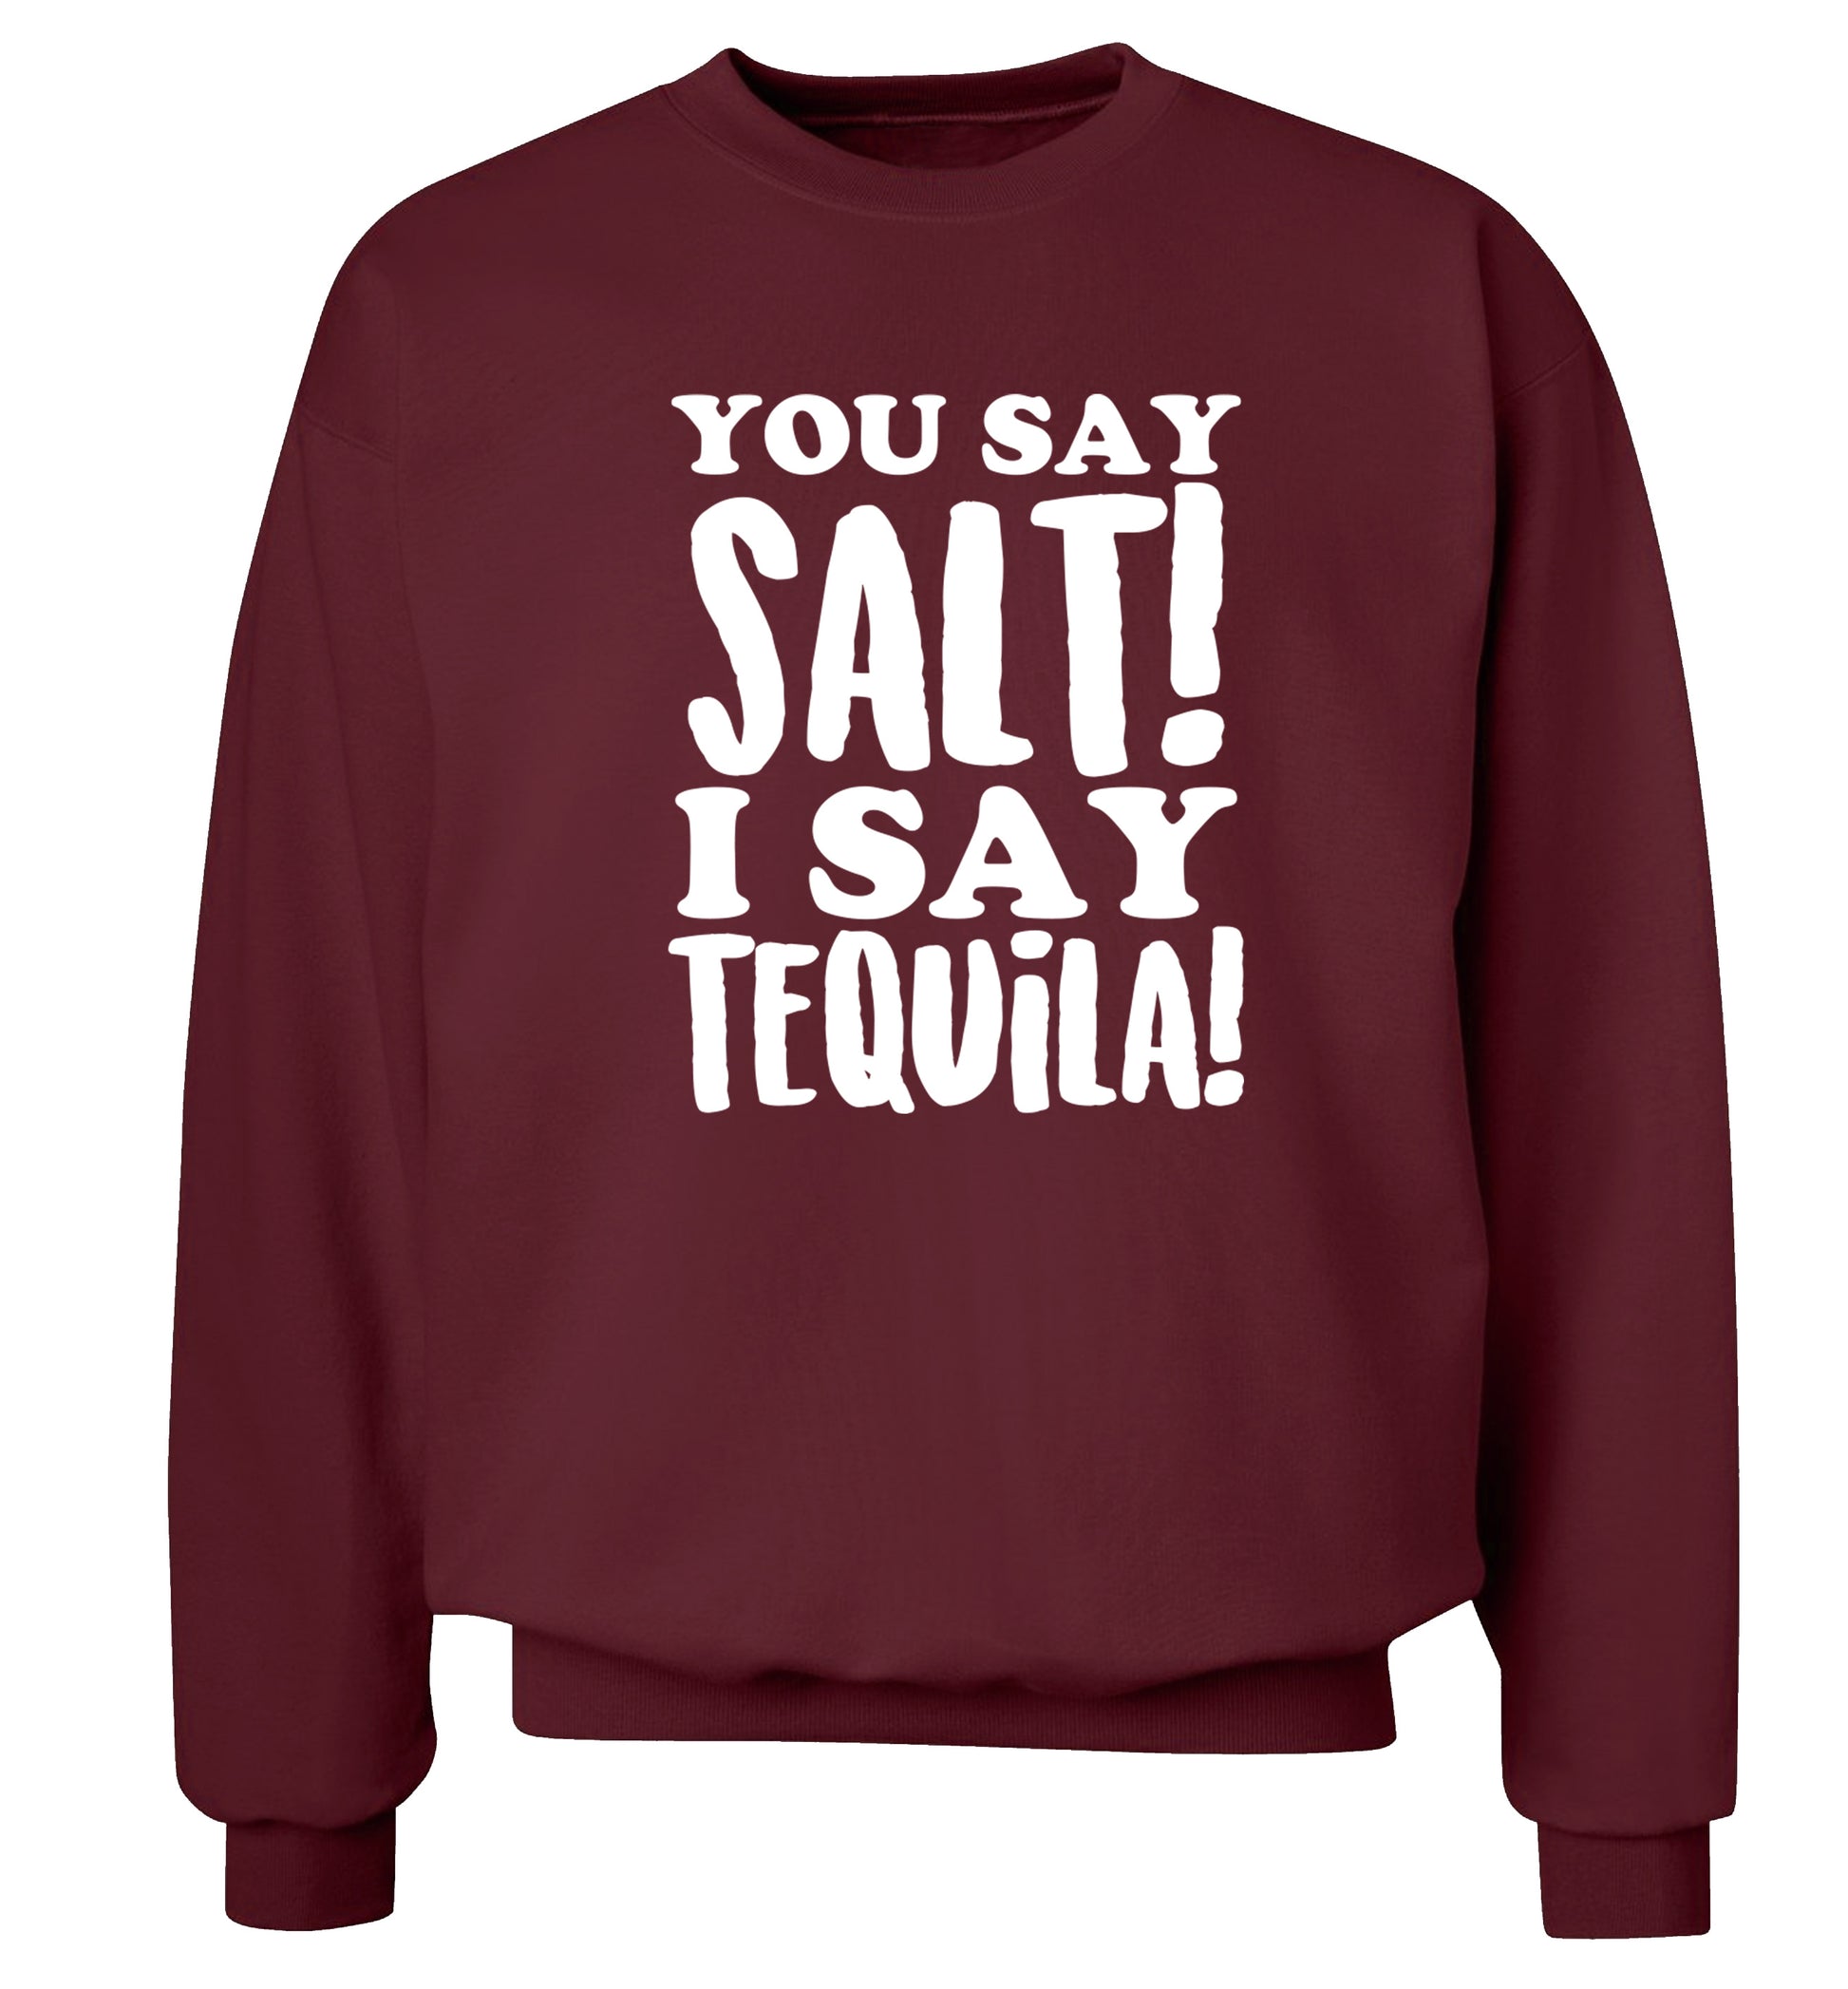 You say salt I say tequila Adult's unisex maroon Sweater 2XL